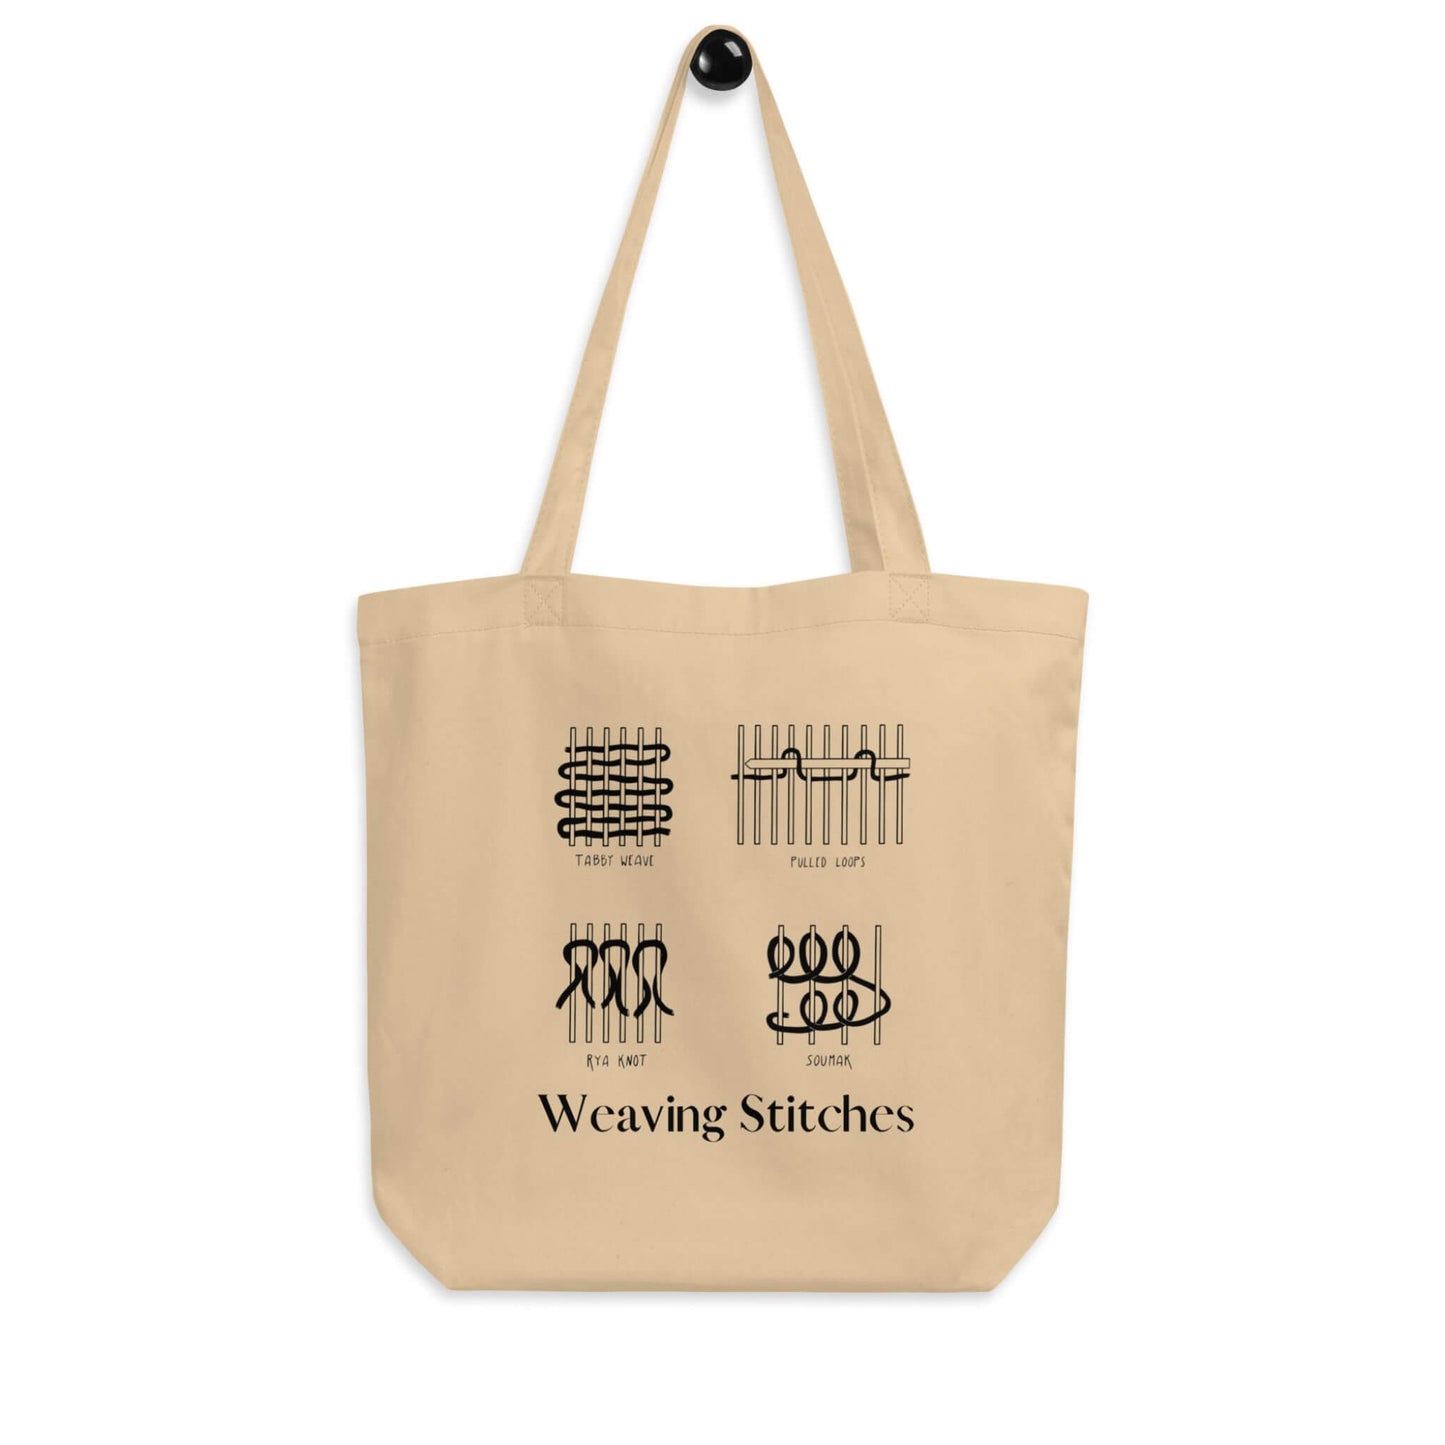 illustrated weaving stitches tote bag - wear and woven